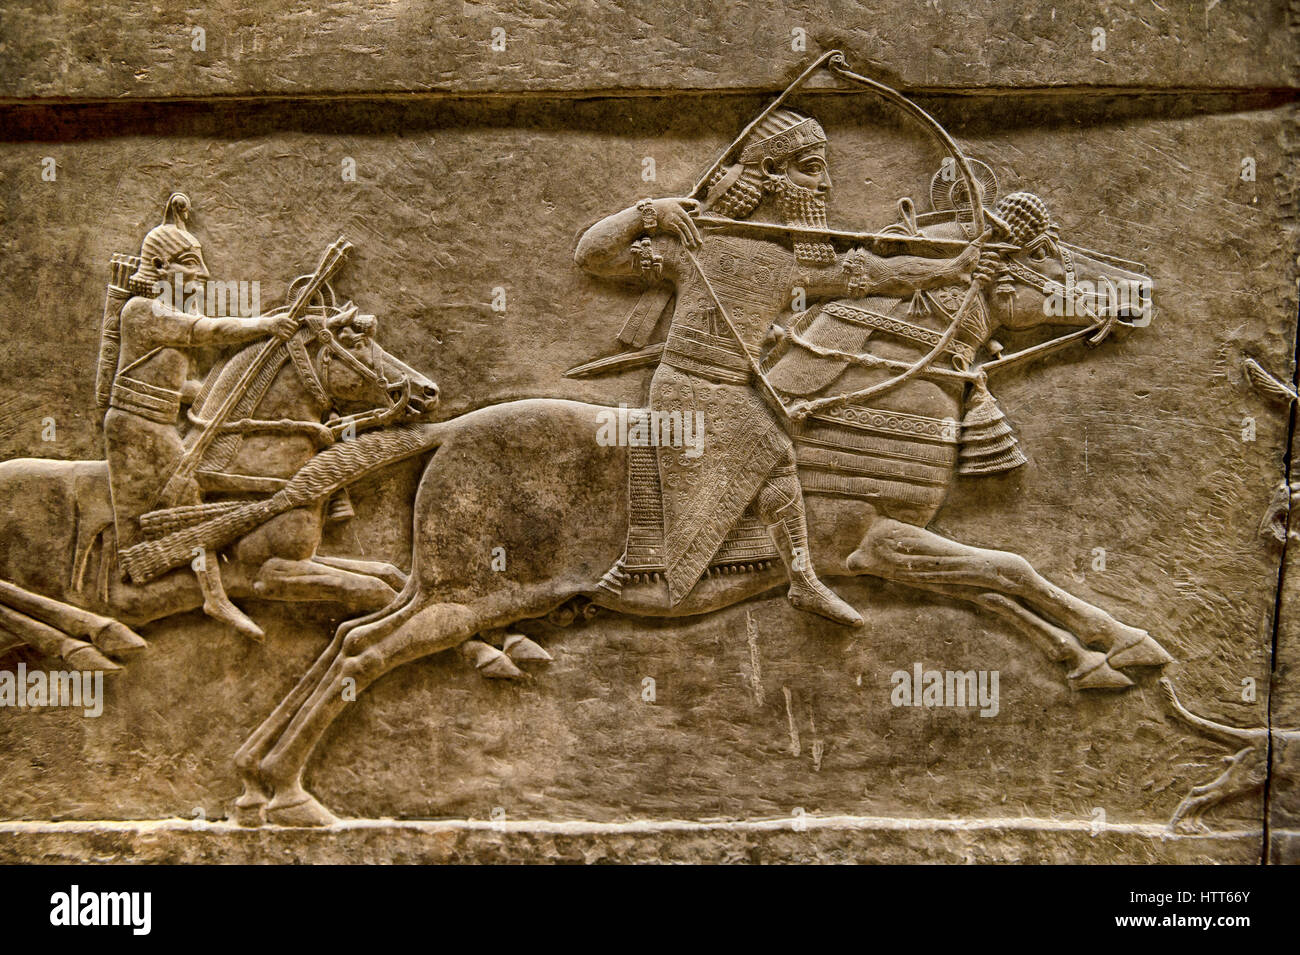 Assyrian relief sculpture panel of Ashurnasirpal lion hunting.  From Nineveh  North Palace, Iraq,  668-627 B.C.  British Museum Assyrian  Archaeologic Stock Photo